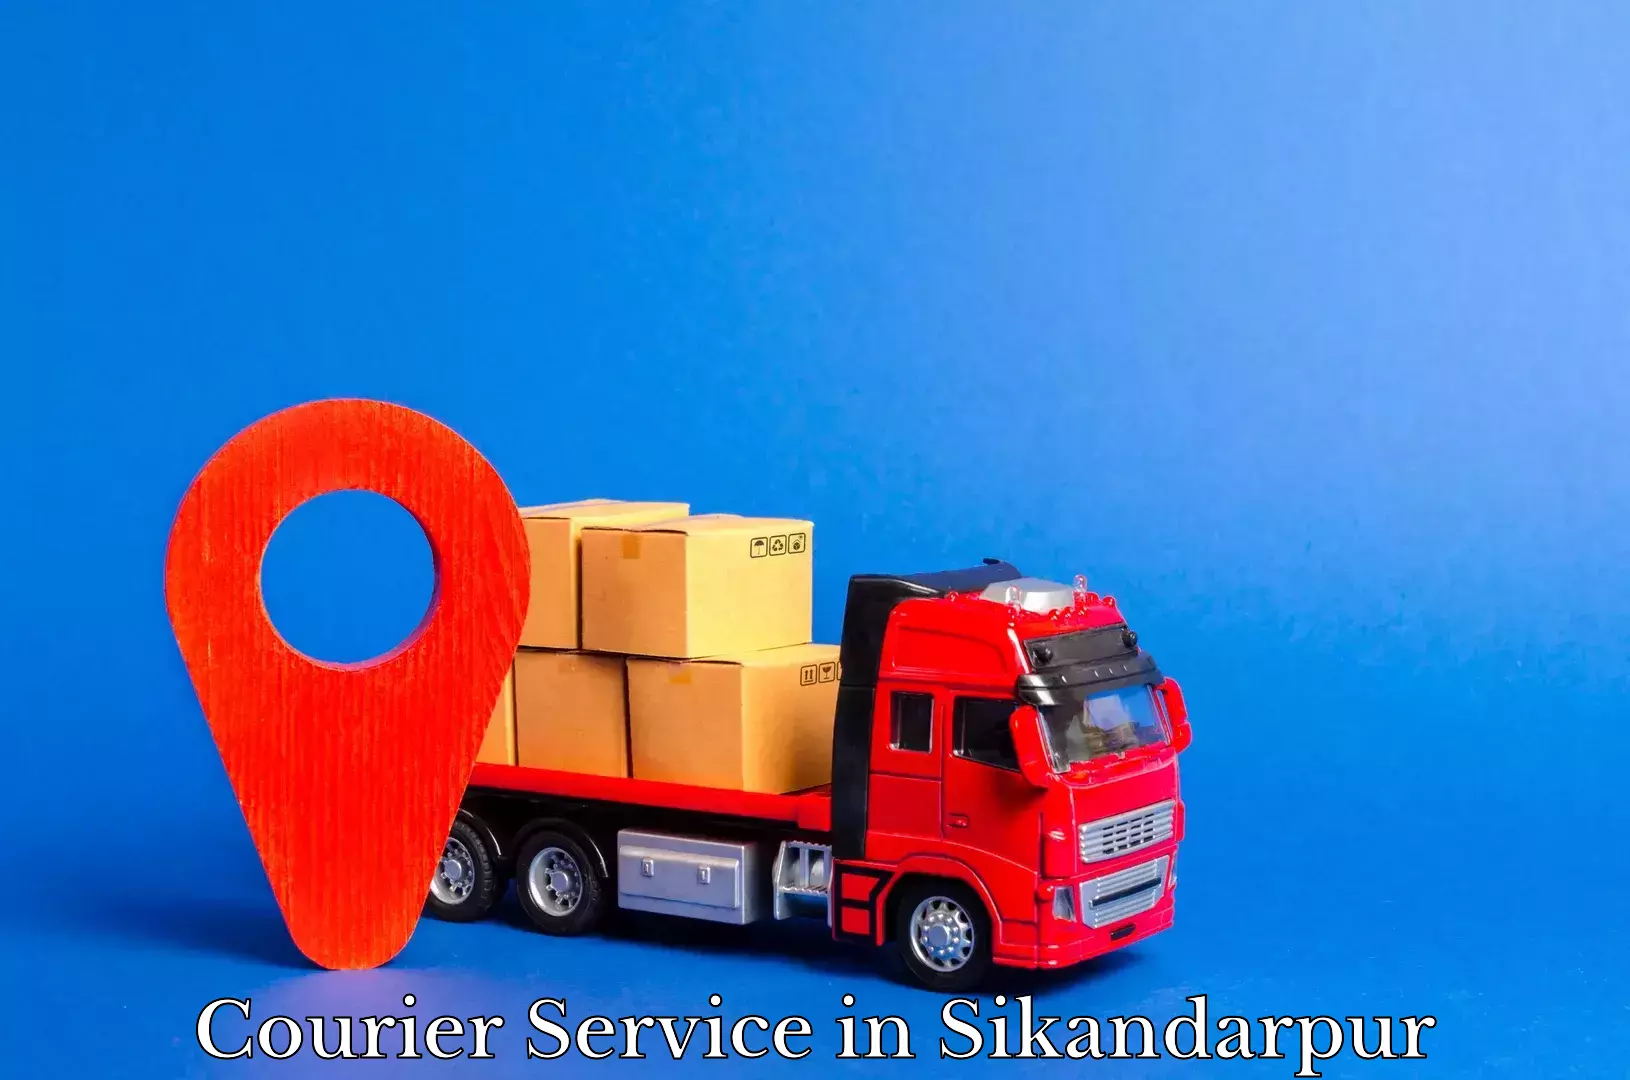 Nationwide parcel services in Sikandarpur